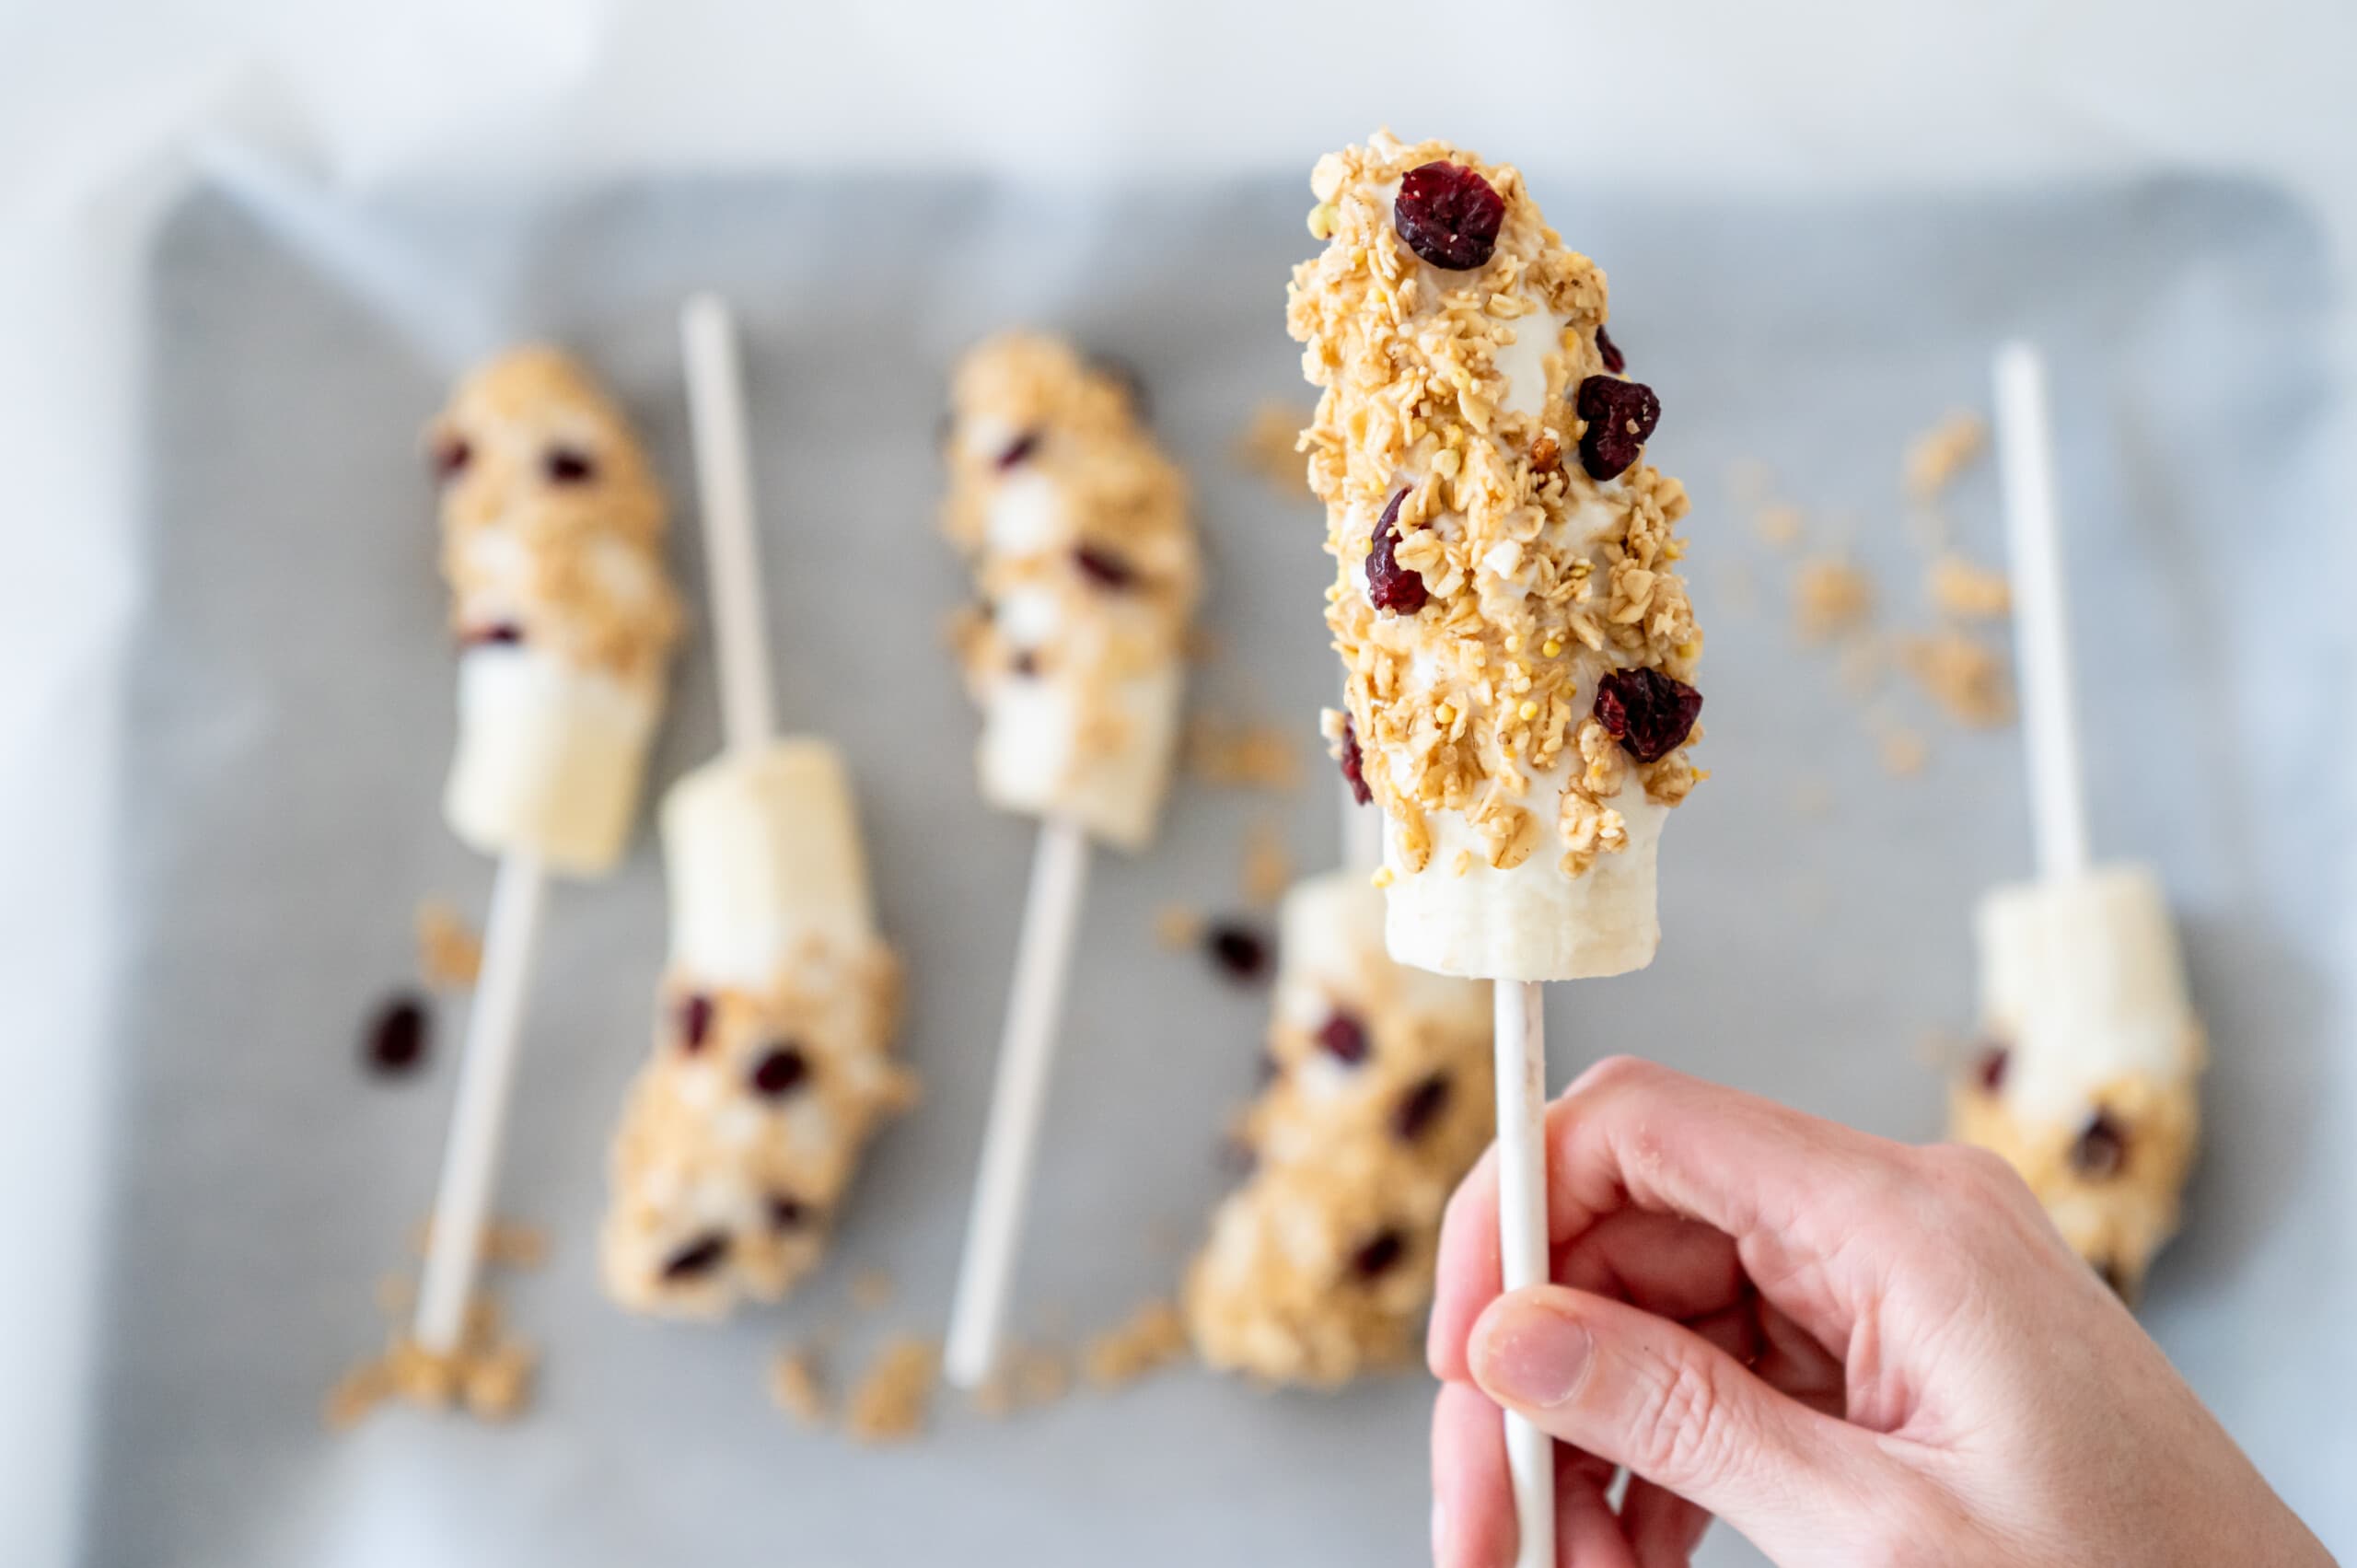 Hand holding up a banana popped. The banana is covered with yogurt, granola and dried cranberries. There's a parchment paper lined cookie sheet with more banana pops in the background.